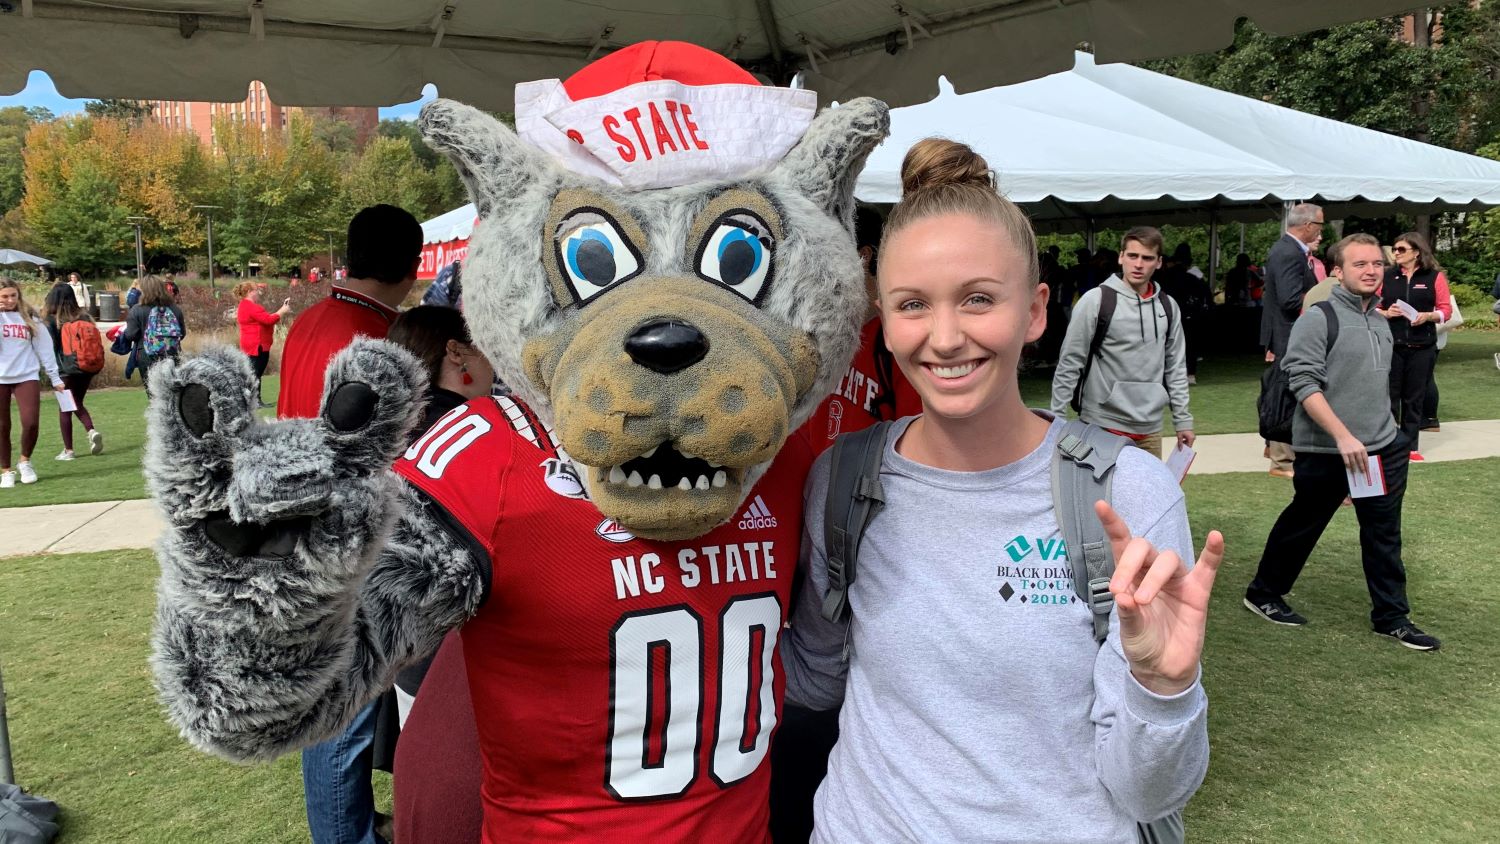 Sarah Wagoner doing the wolfie with Mr Wuf